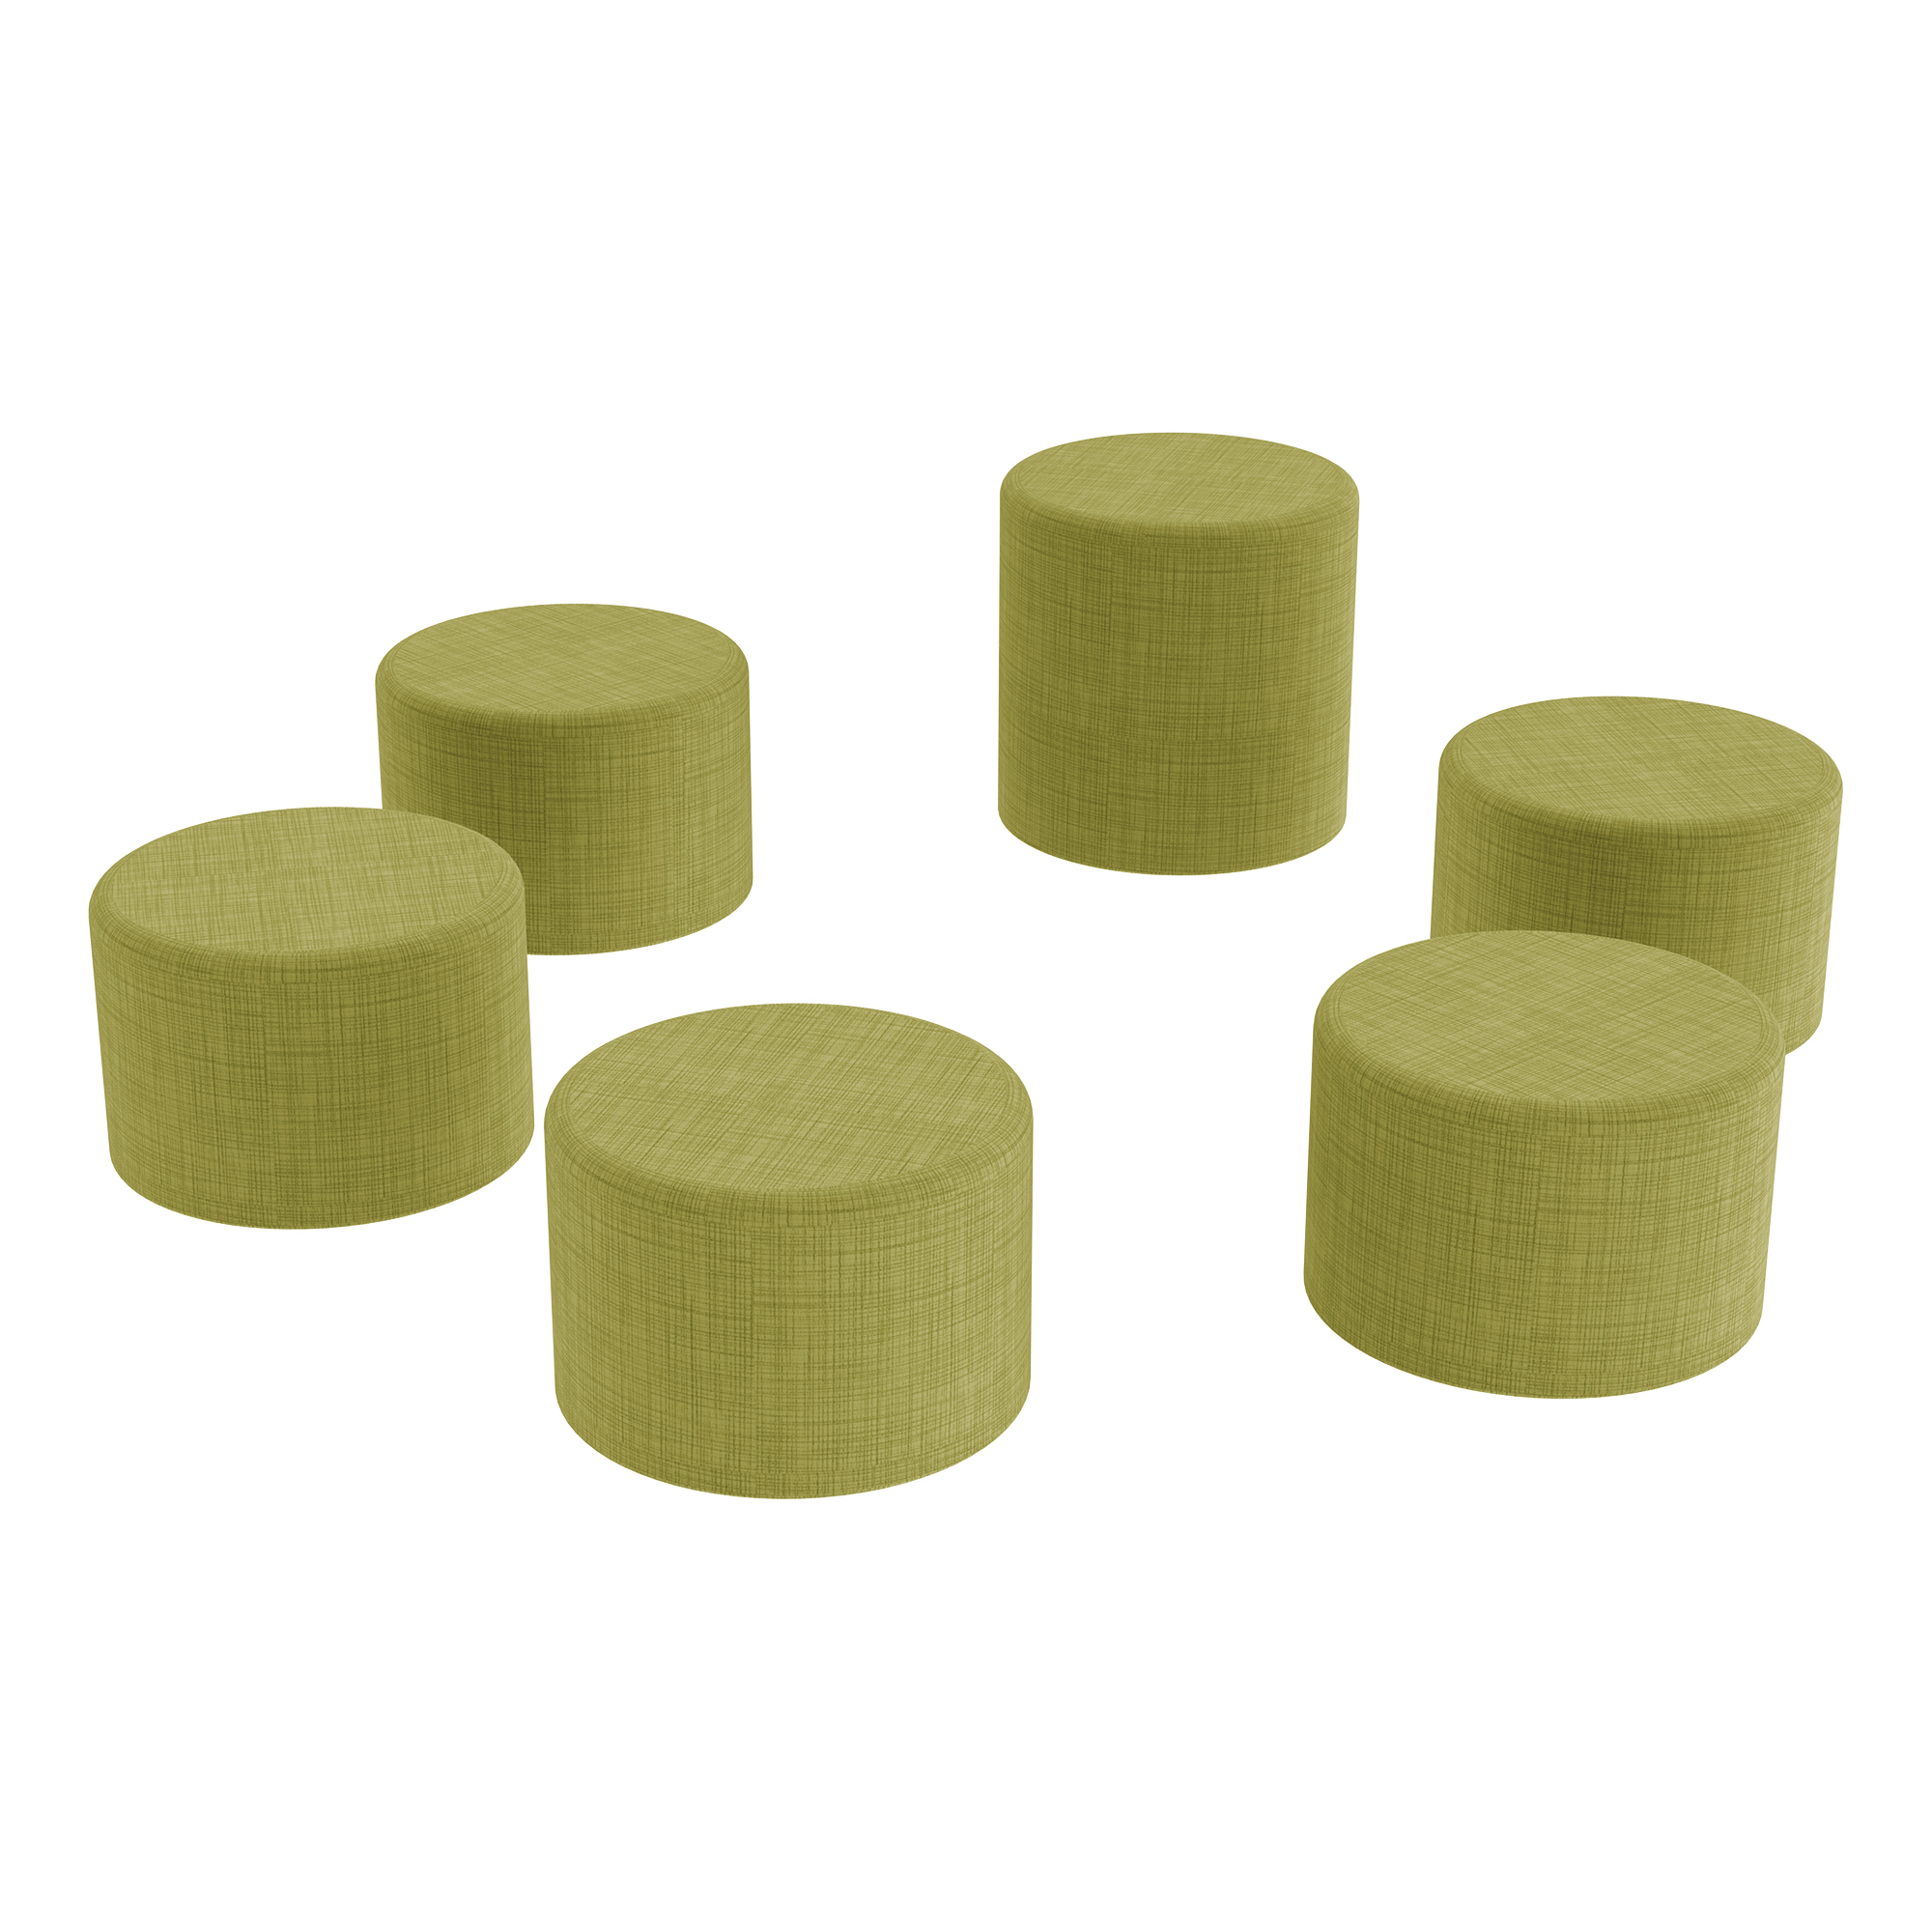 Shapes Series II Modular Soft Seating - Cylinder at School Outfitters